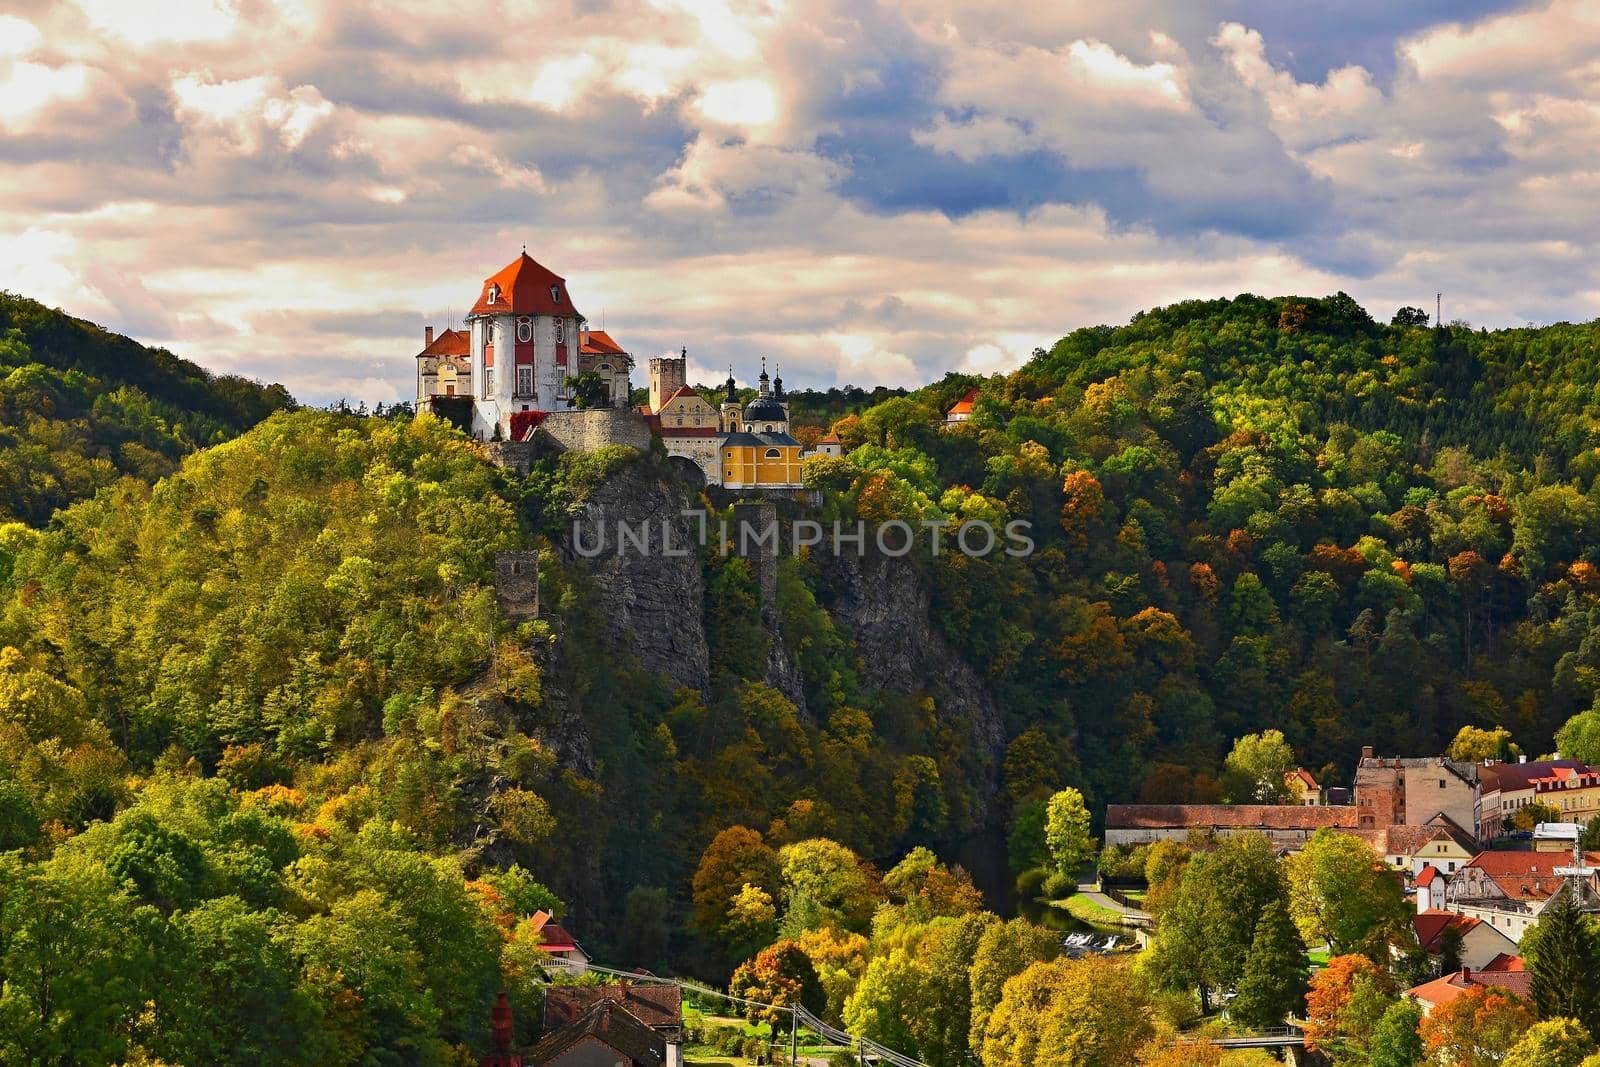 Beautiful autumn landscape with river, castle and blue sky with clouds and sun. Vranov nad Dyji (Vranov above Thaya) chateau, river Thaya, Czech Republic.